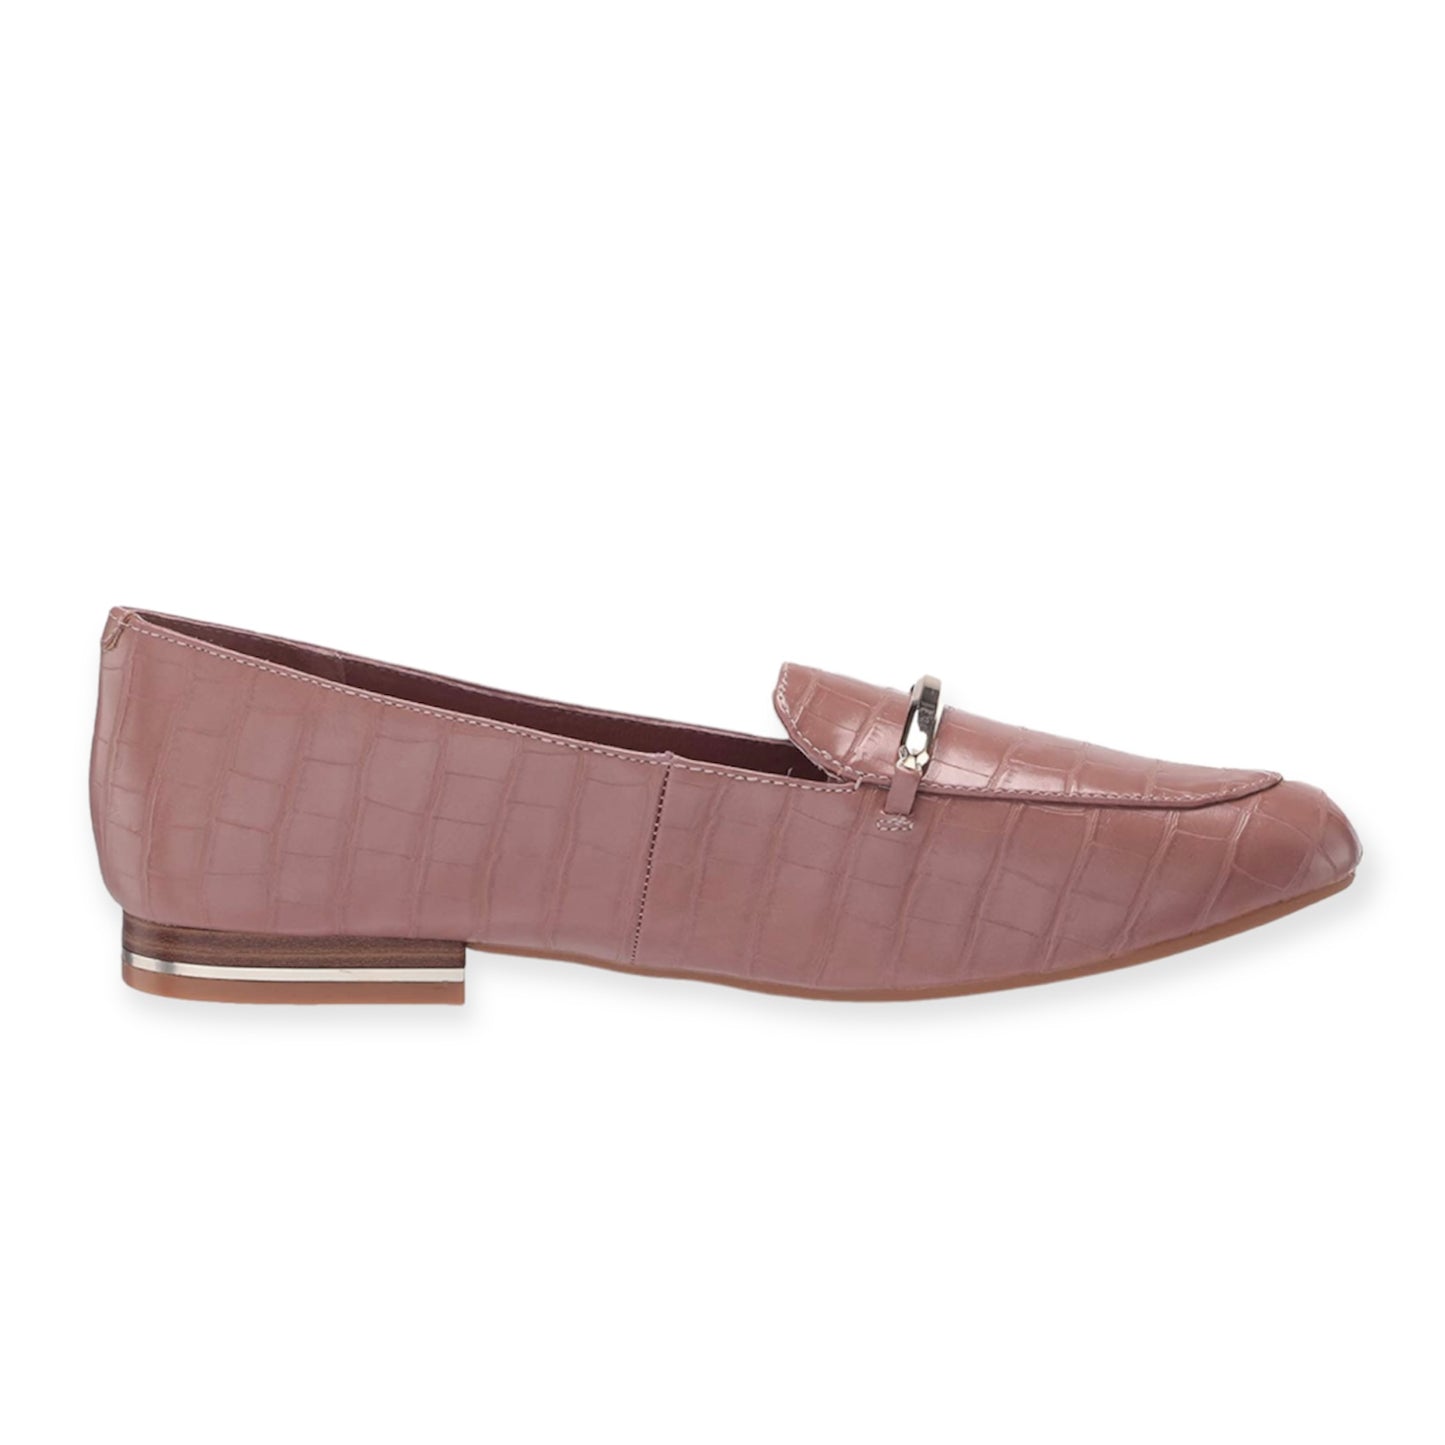 BALANCE Loafers Bar Slip On Women's Shoes